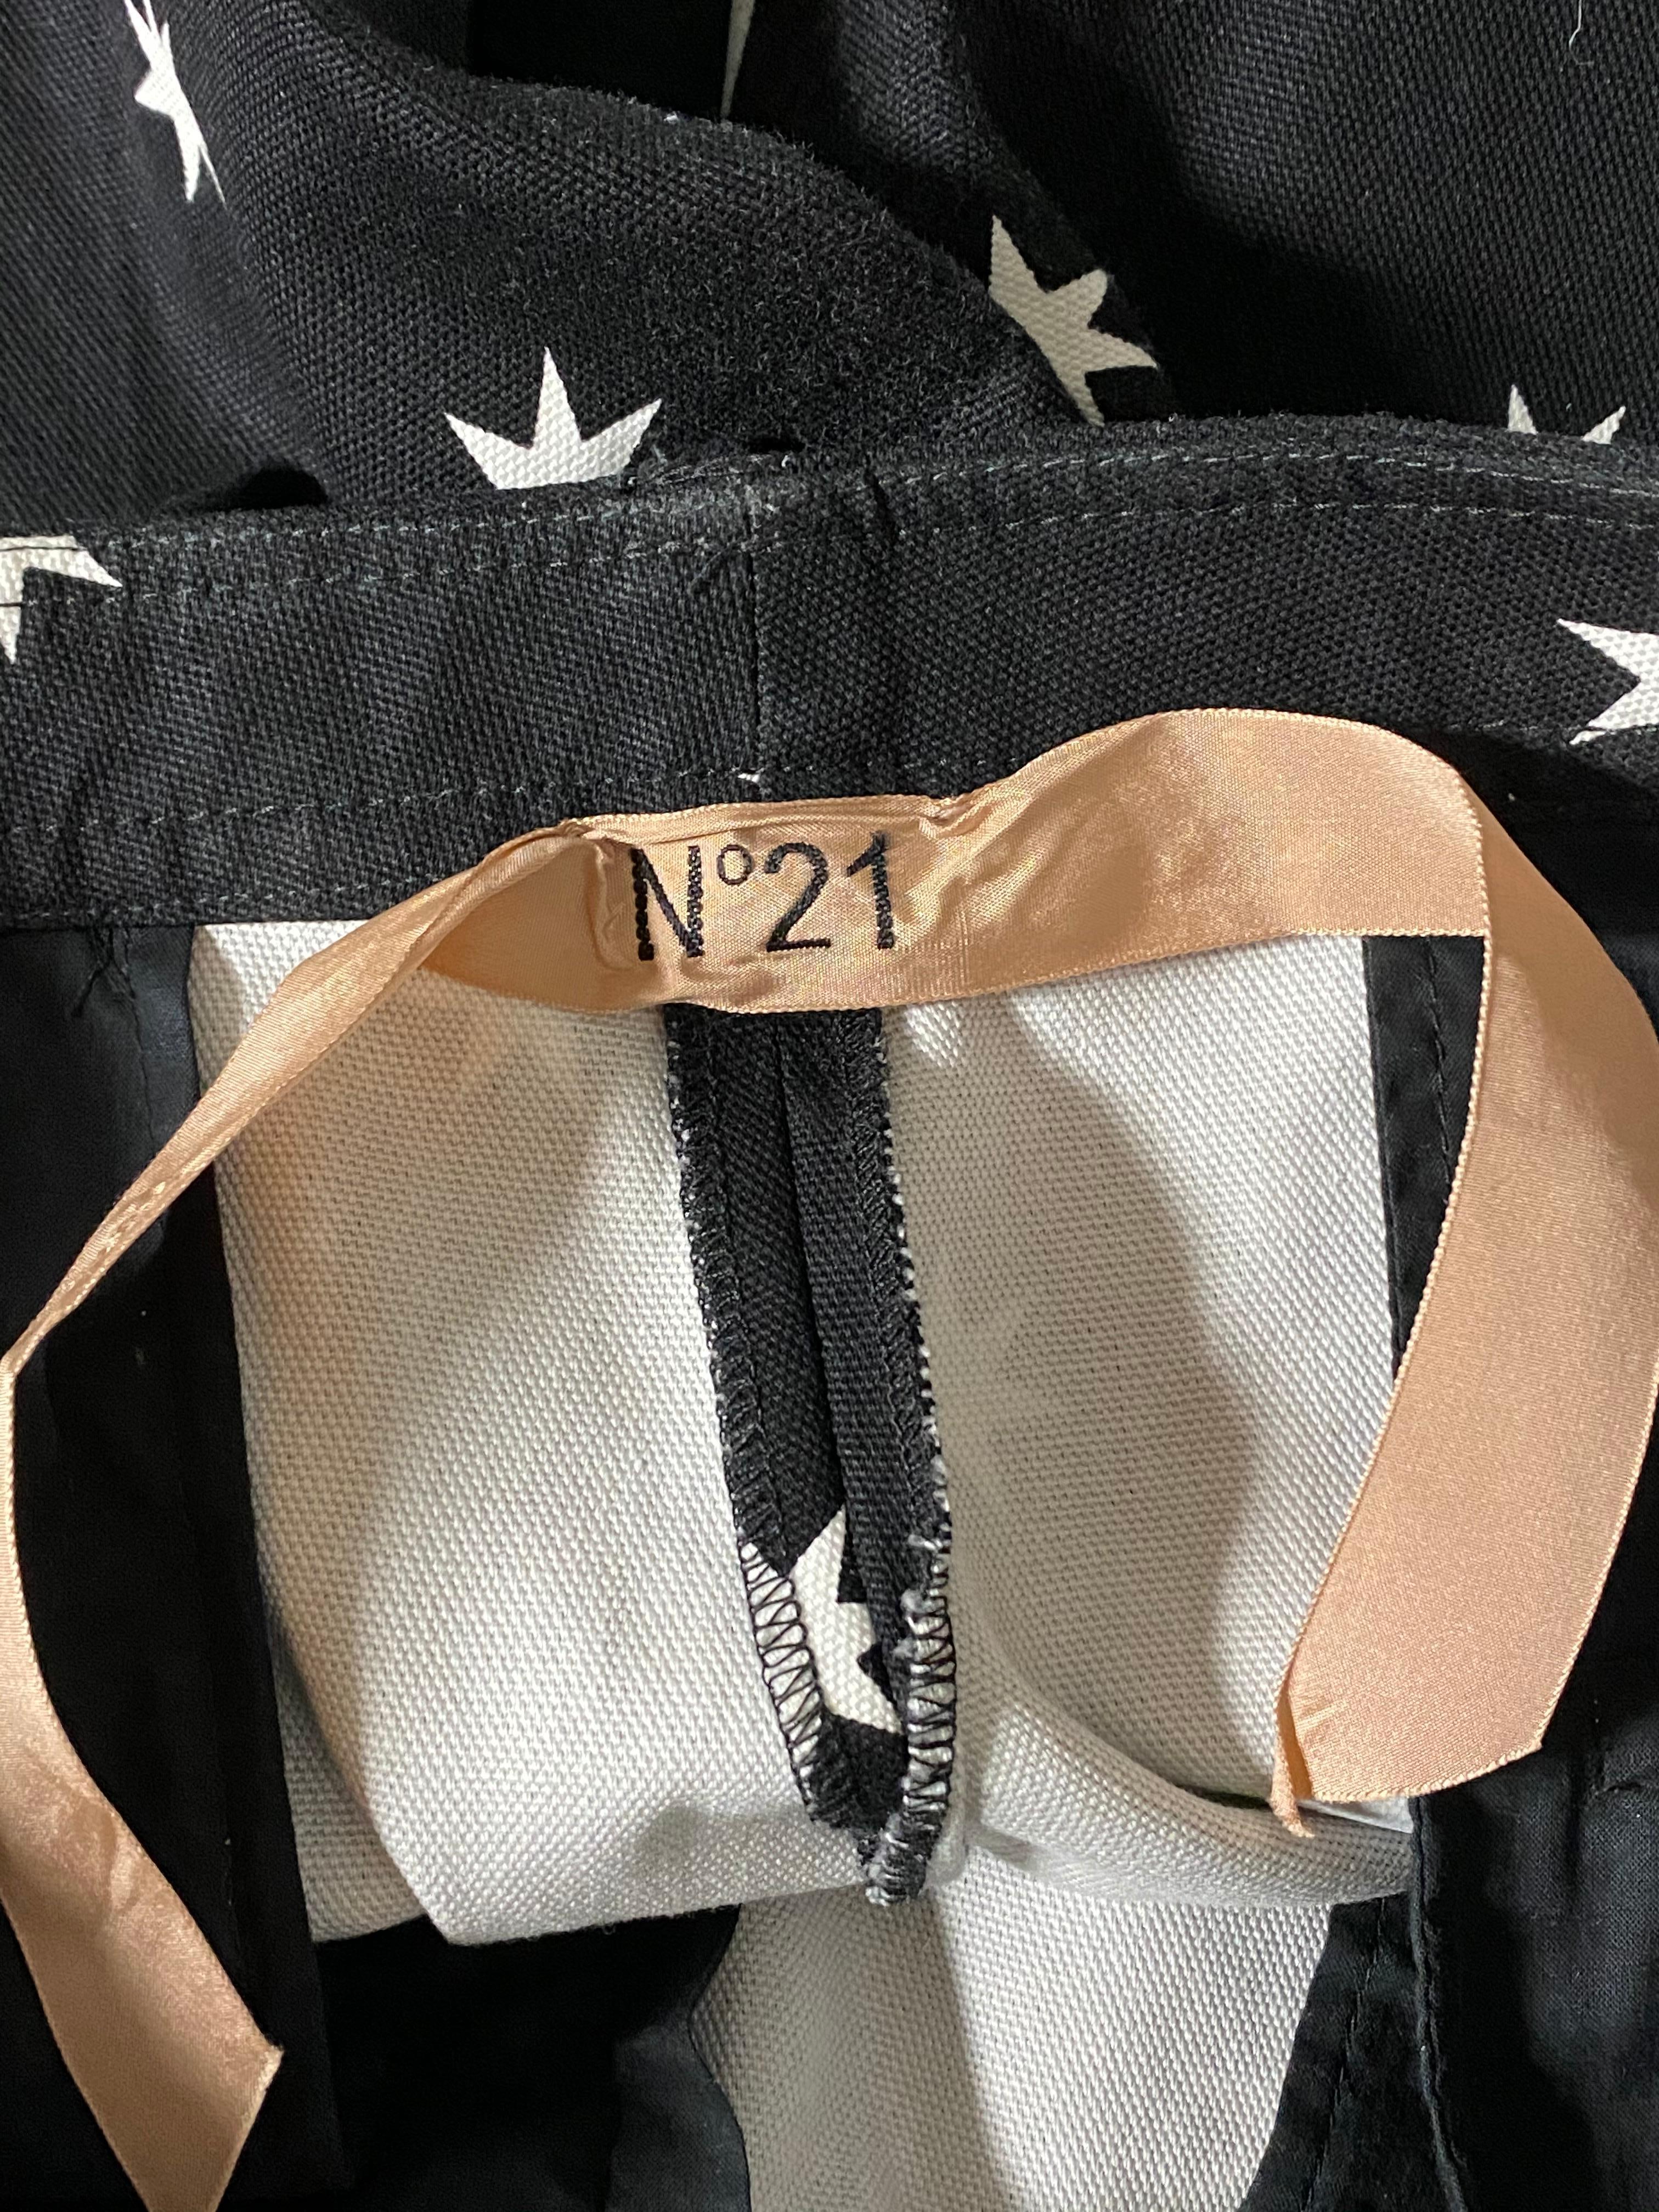 NO. 21 Black and White Cotton Star Pants, Size 44 For Sale 1